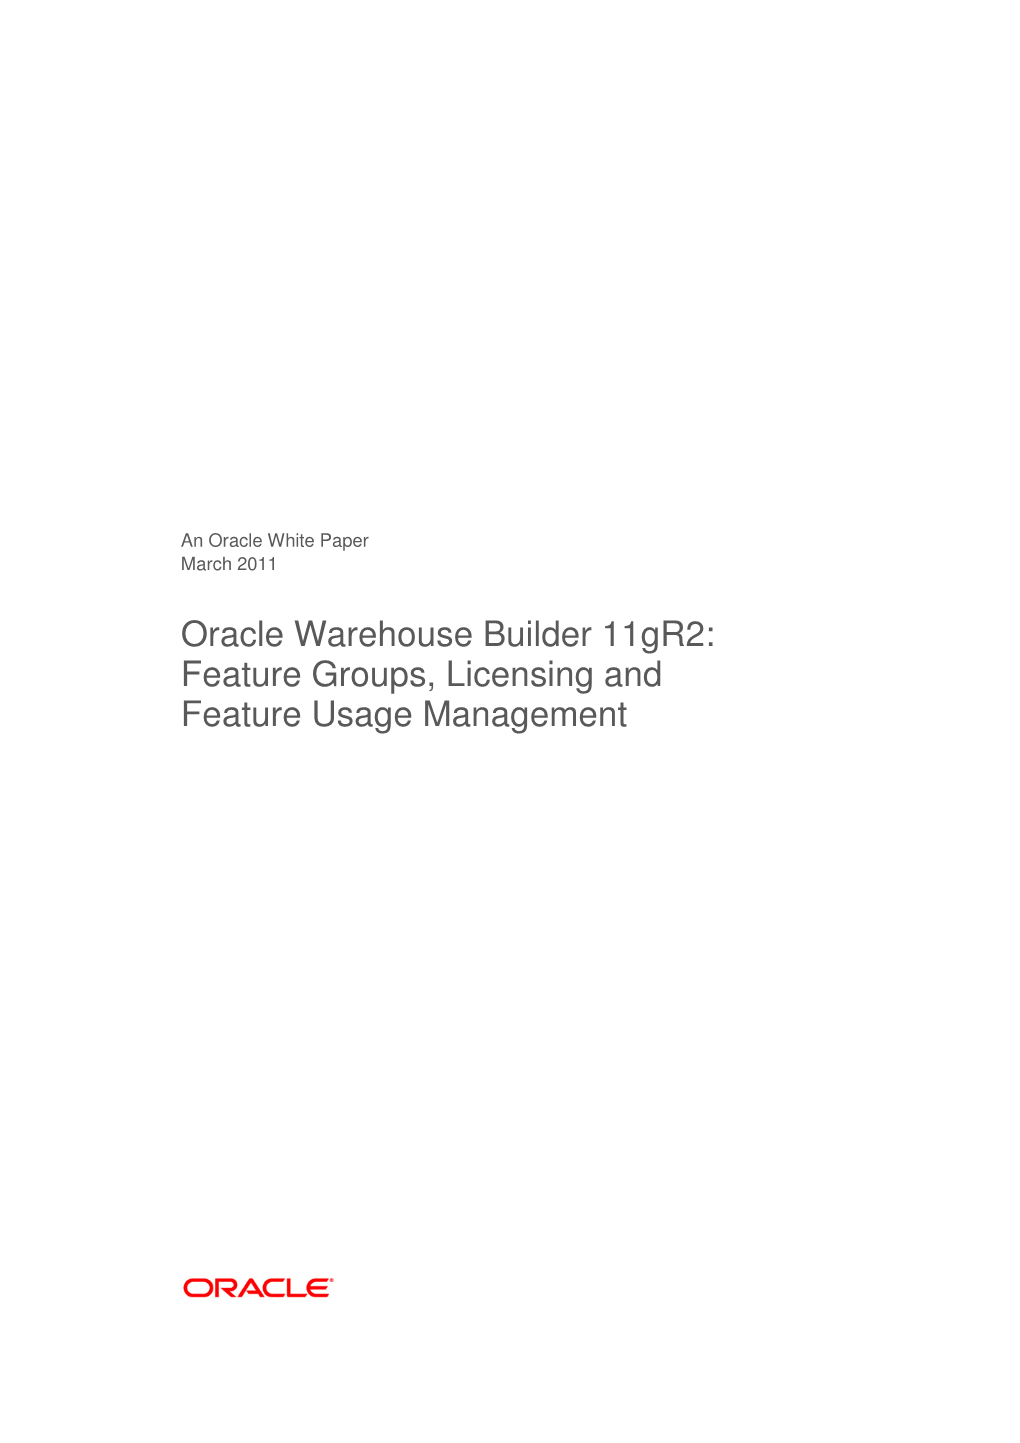 Oracle Warehouse Builder 11Gr2: Feature Groups, Licensing and Feature Usage Management